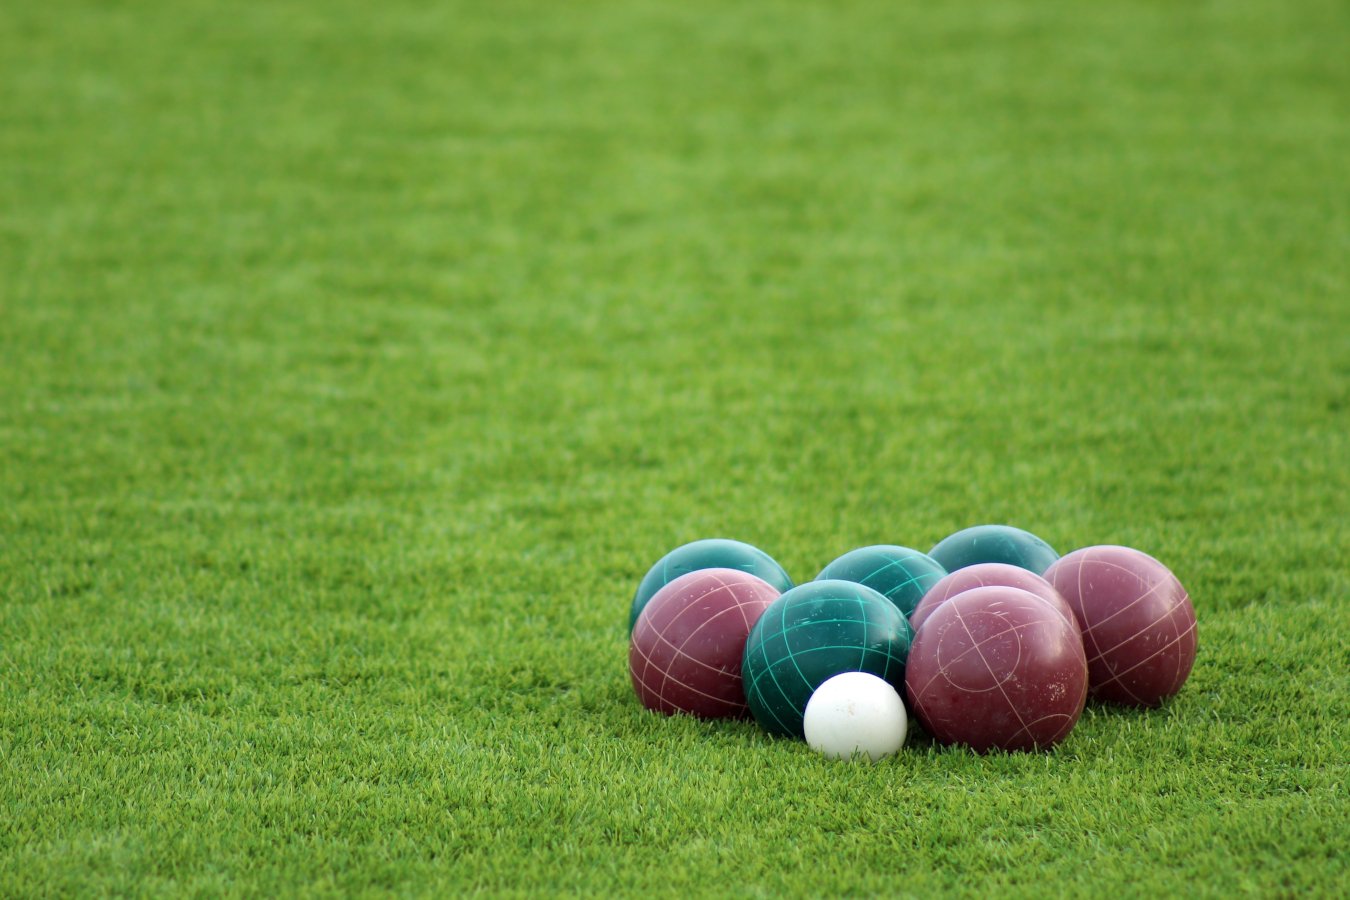 Pallino Is the small white ball used in Bocce Ball Games